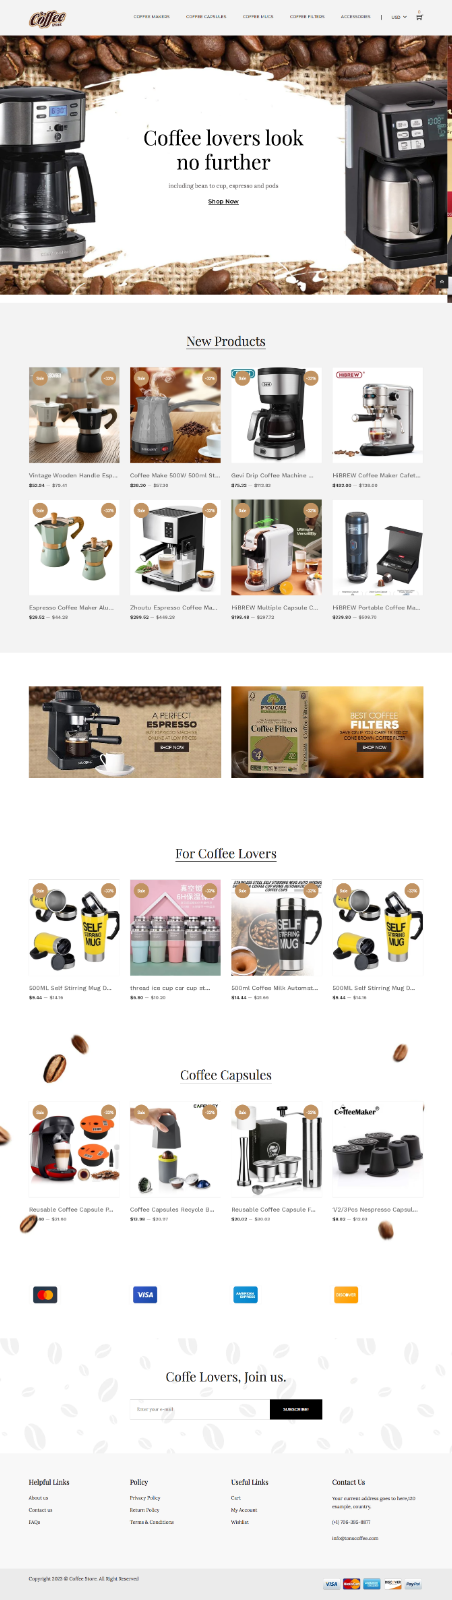 COFFEE NICHE Fully Automated Shopify Dropshipping Business idea Store Website